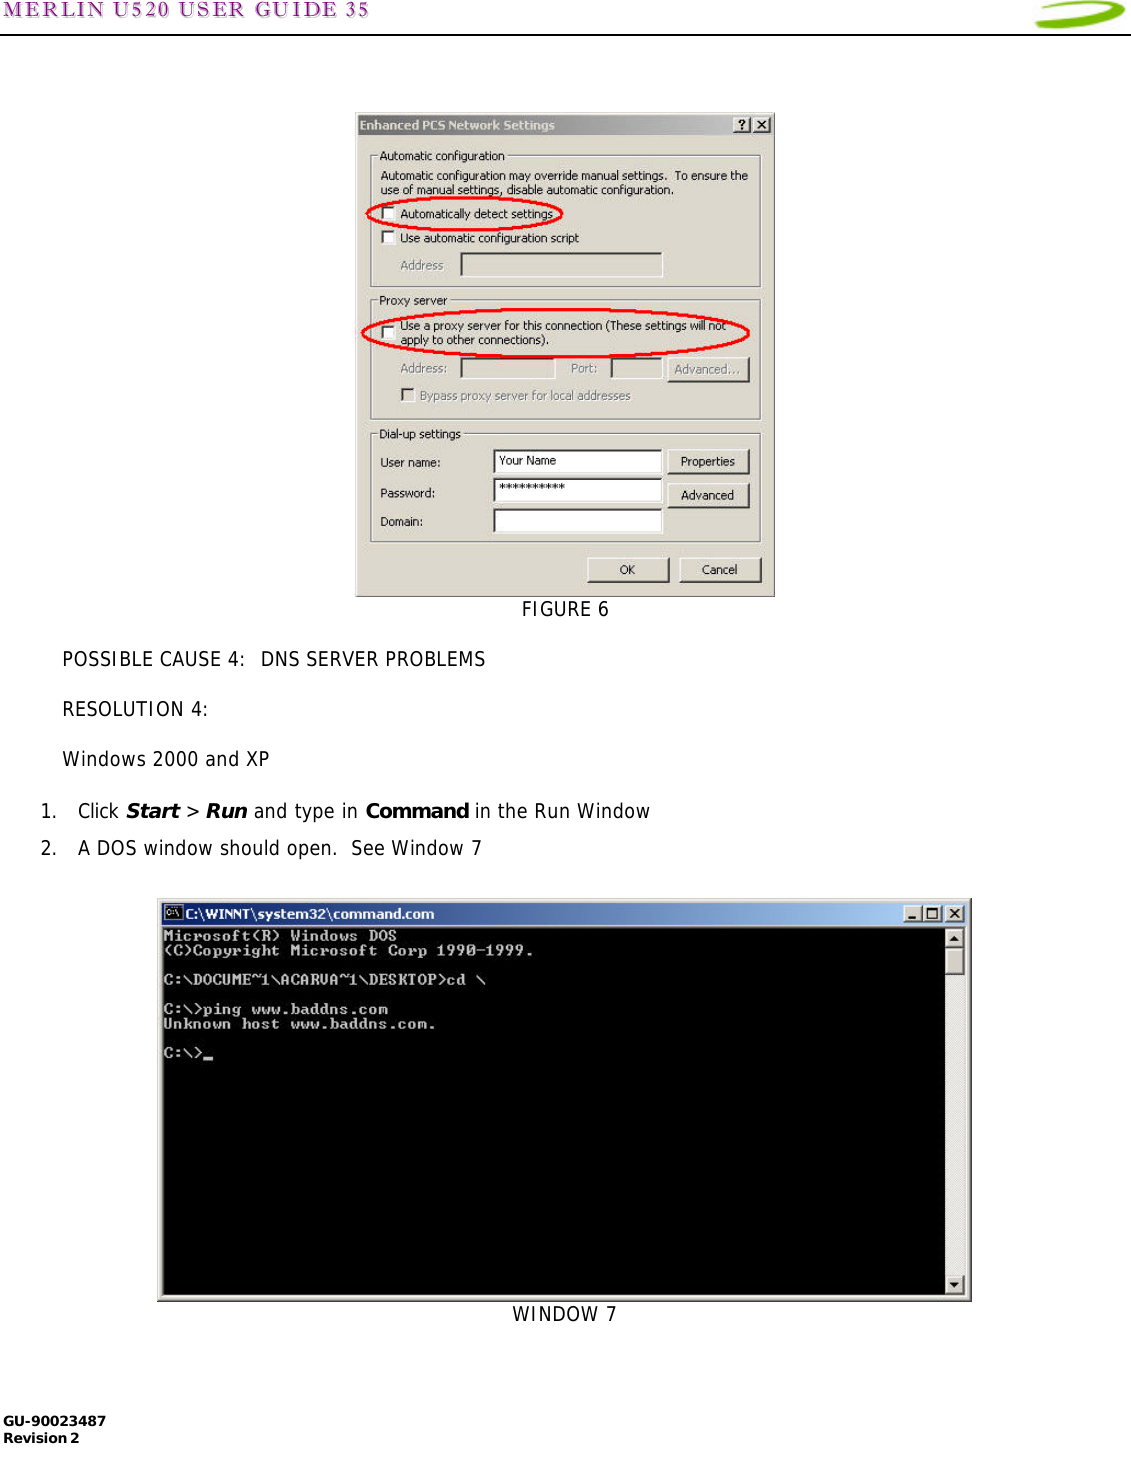 MMEERRLLIINN  UU552200  UUSSEERR  GGUUIIDDEE  3355   GU-90023487 Revision 2      FIGURE 6  POSSIBLE CAUSE 4:  DNS SERVER PROBLEMS  RESOLUTION 4:    Windows 2000 and XP  1. Click Start &gt; Run and type in Command in the Run Window 2. A DOS window should open.  See Window 7    WINDOW 7  